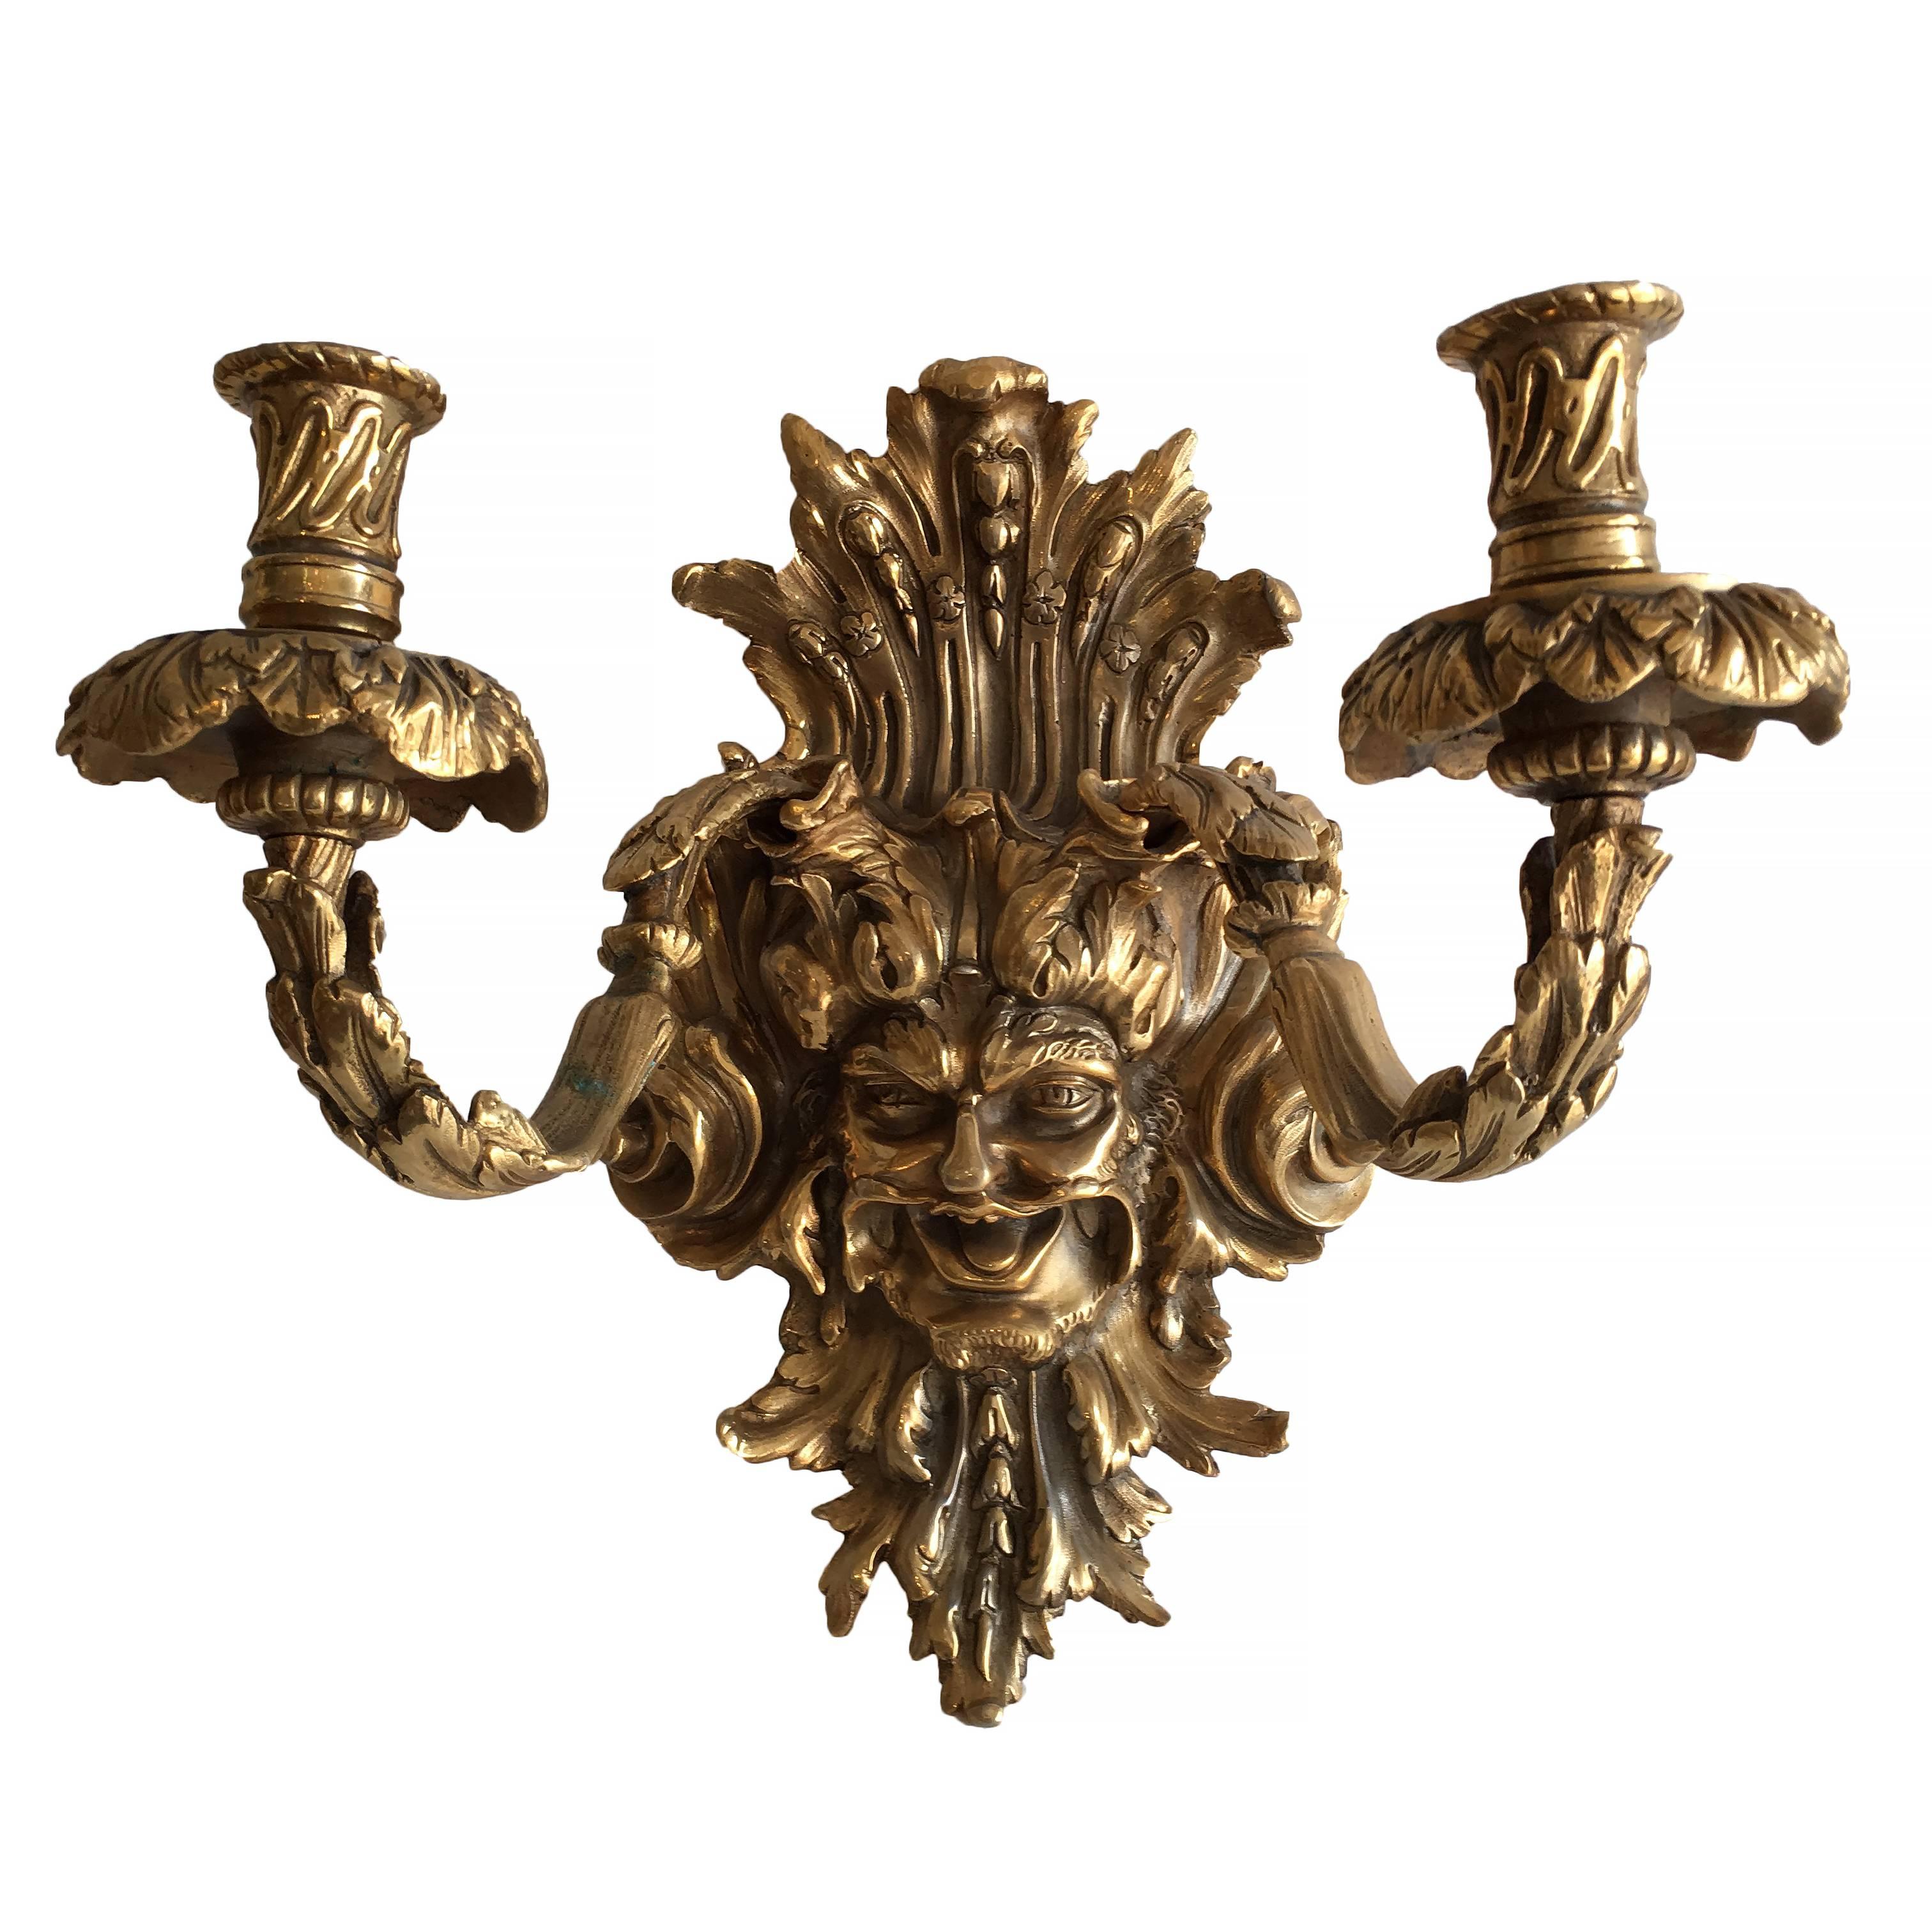 Empire style Bacchus face bronze double arm candle wall sconce, pair

Product handcrafted in the USA with the highest quality materials and over 30 years of experience in luxury: lighting (chandeliers, floor lamps, table lamps, sconces), fine